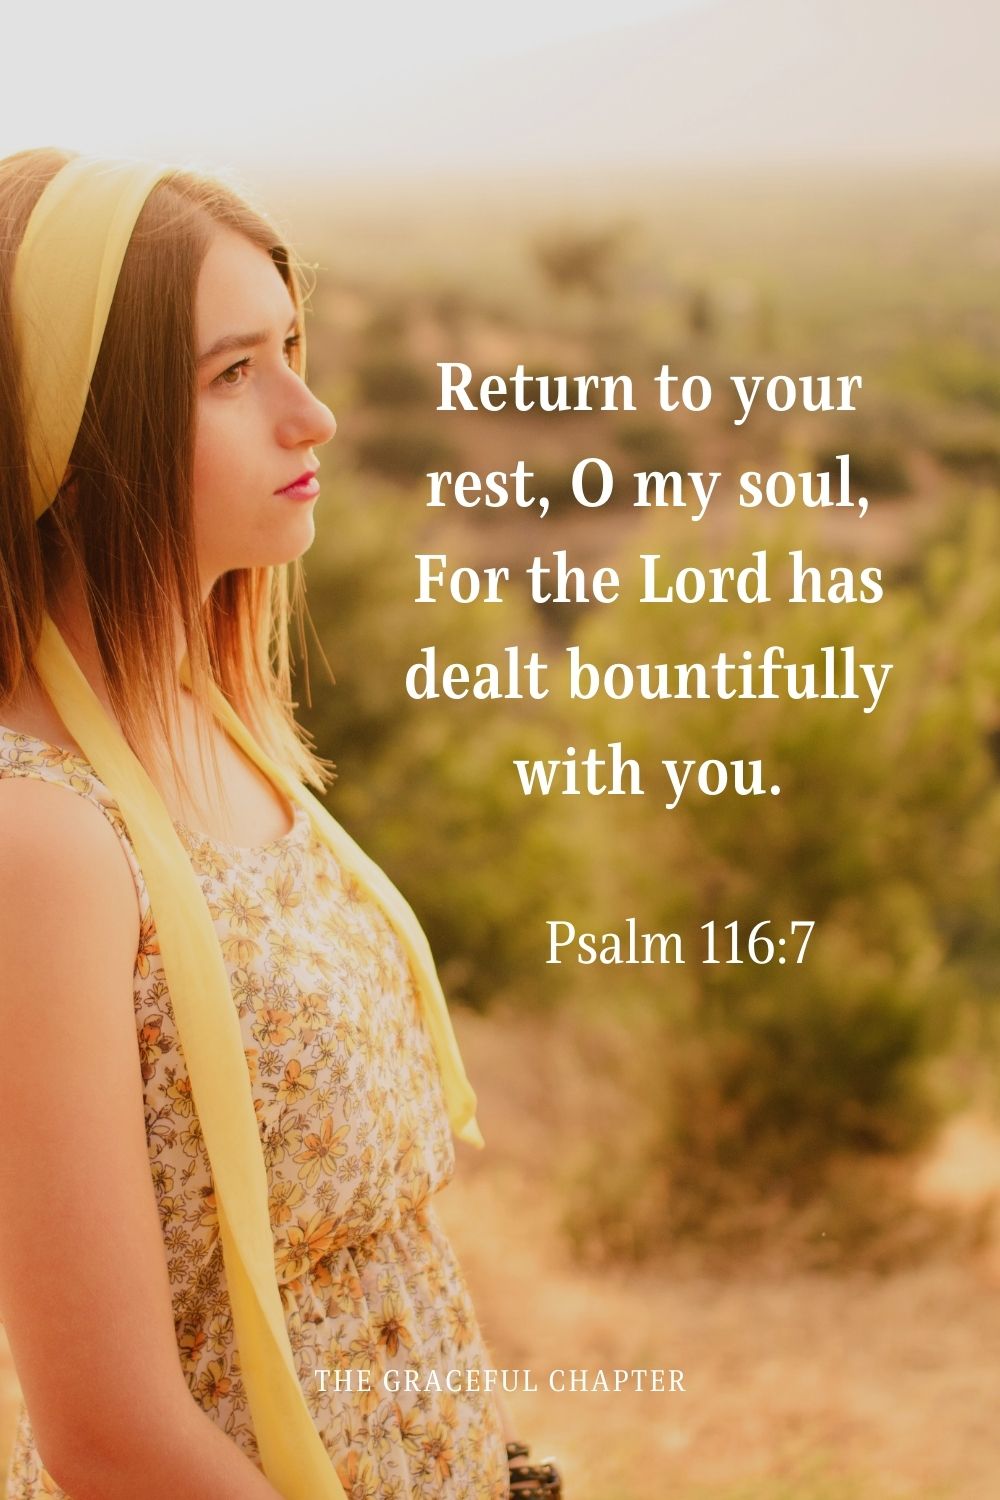 Return to your rest, O my soul, For the Lord has dealt bountifully with you.